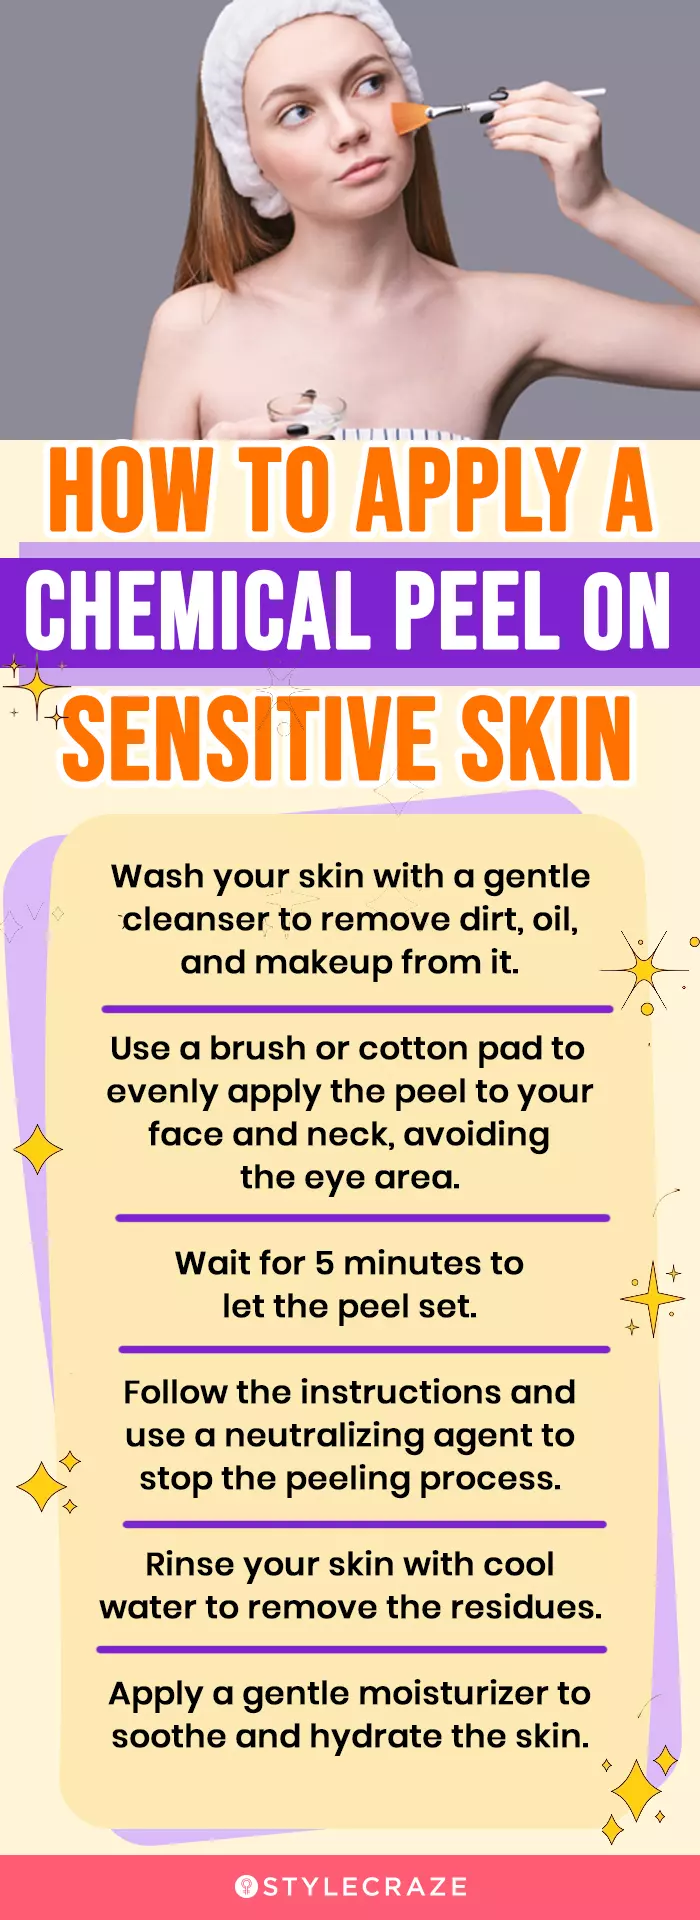 How To Apply A Chemical Peel On Sensitive Skin (infographic)